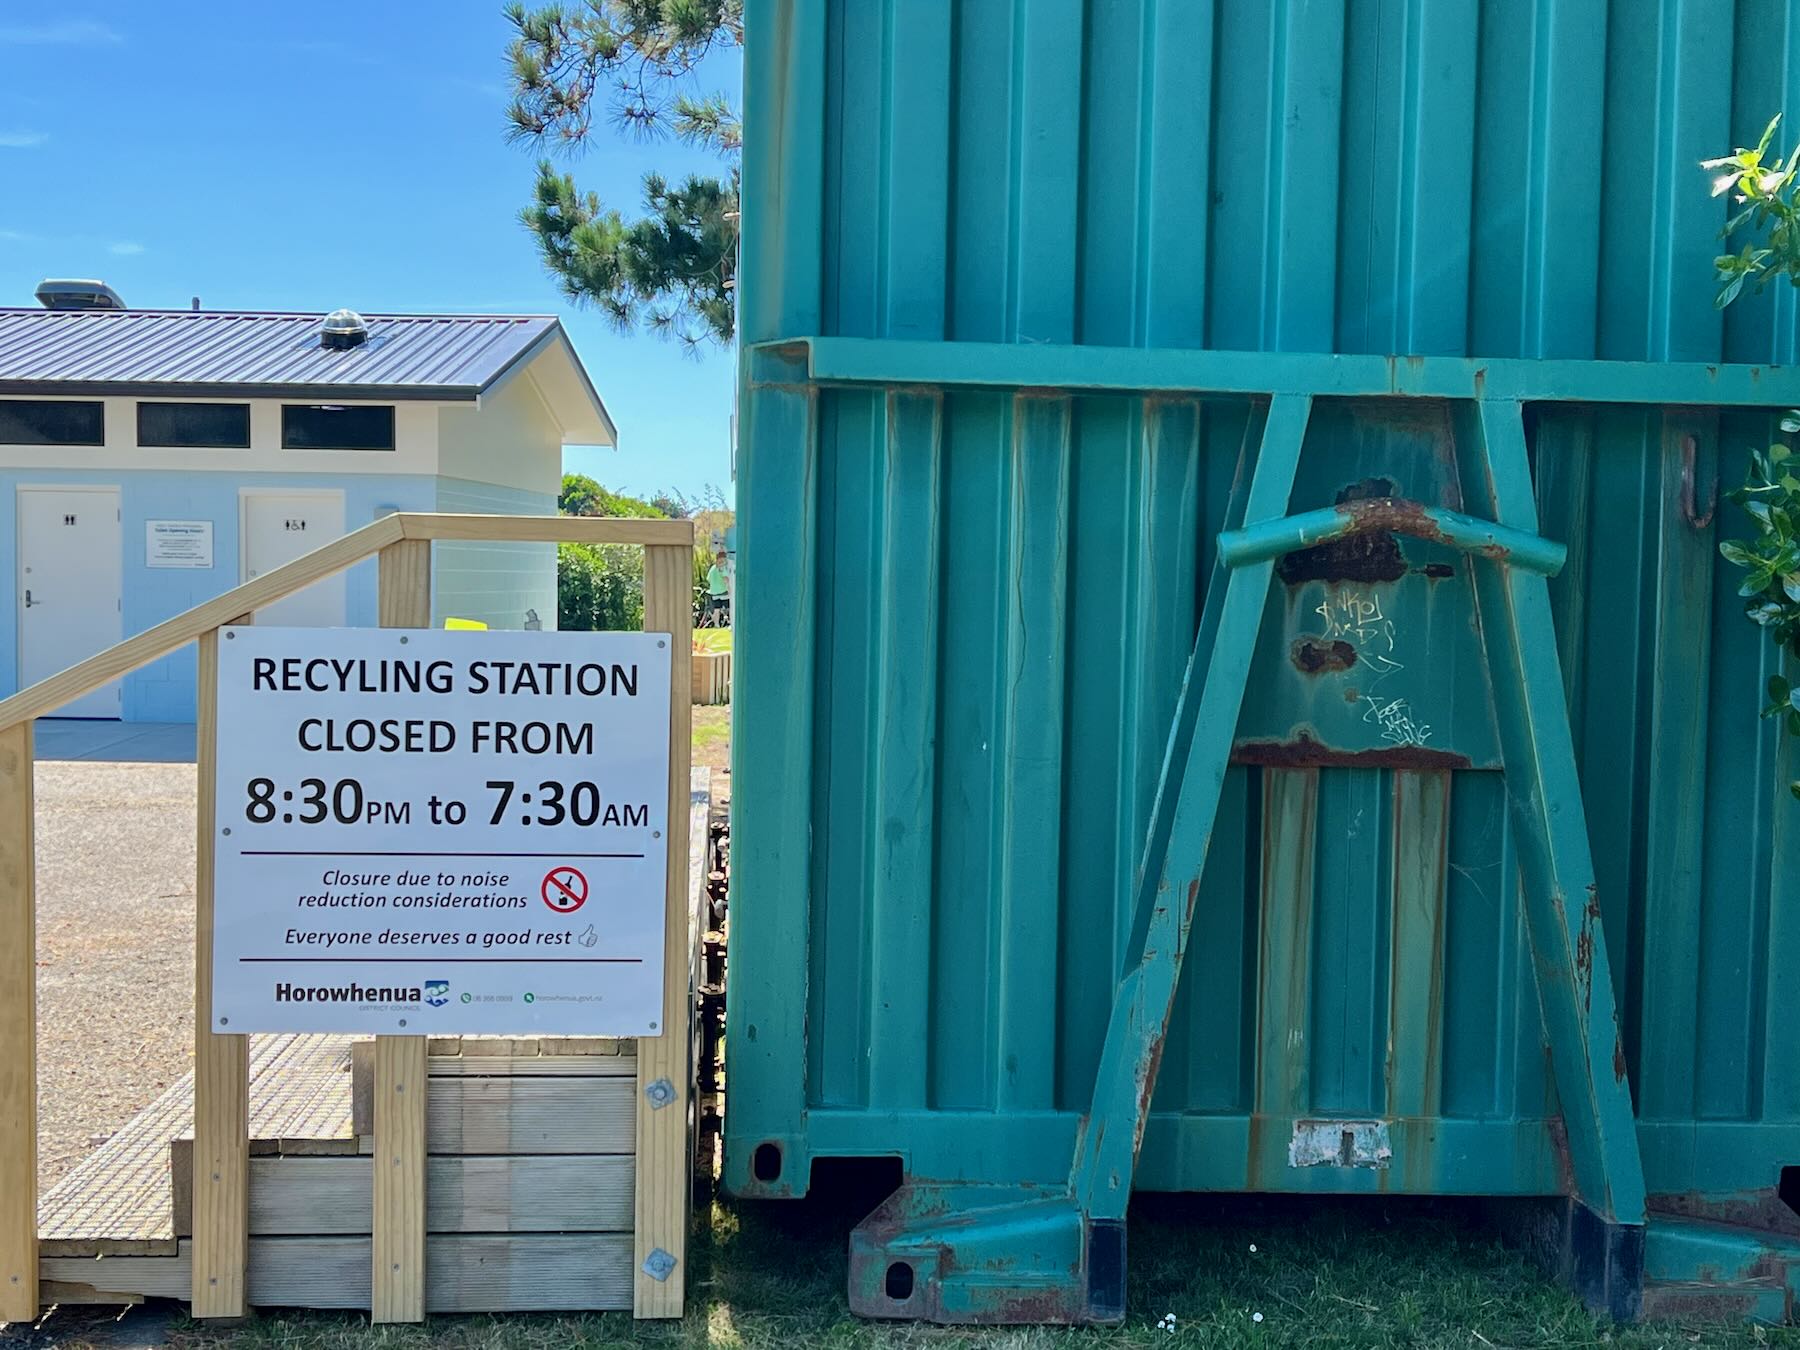 Sign: RECYLING STATION CLOSED FROM 8:30PM to 7:30AM Closure due to noise reduction considerations Everyone deserves a good rest